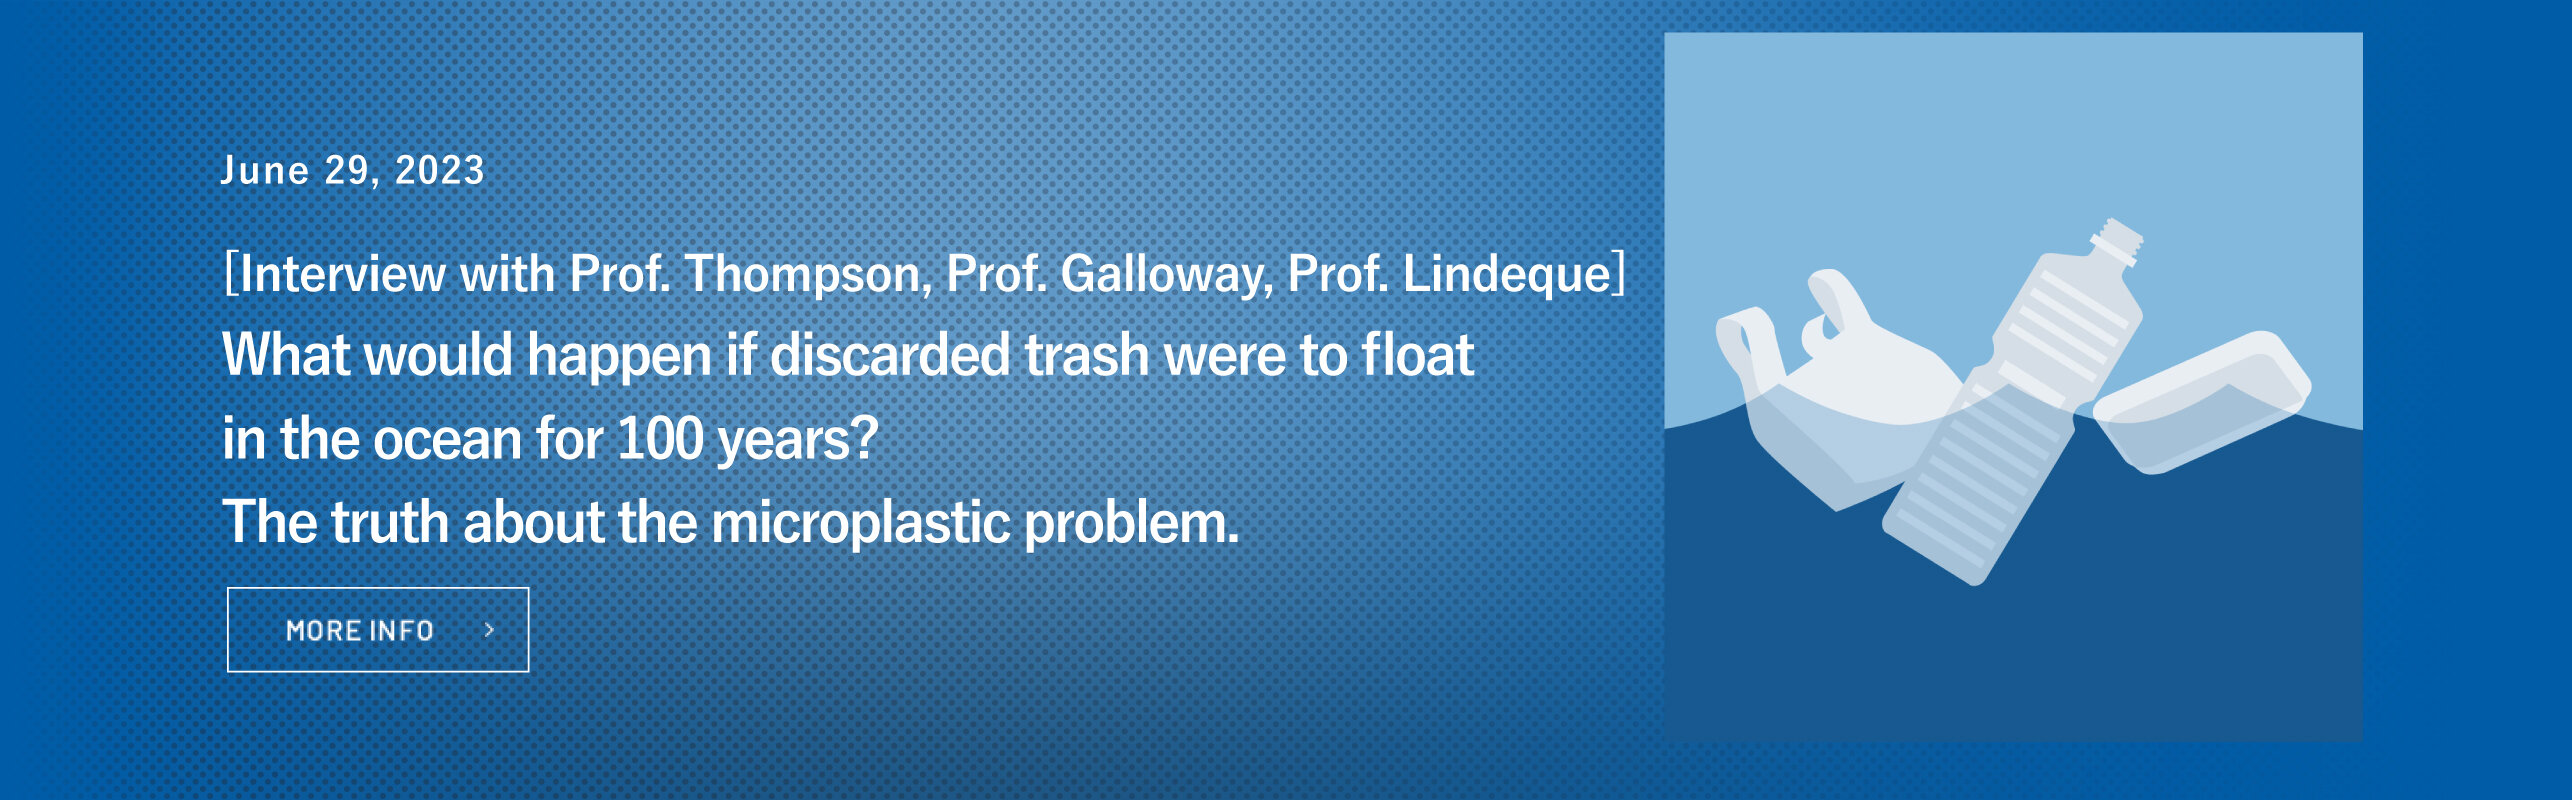 What would happen if discarded trash were to float in the ocean for 100 years? The truth about the microplastic problem